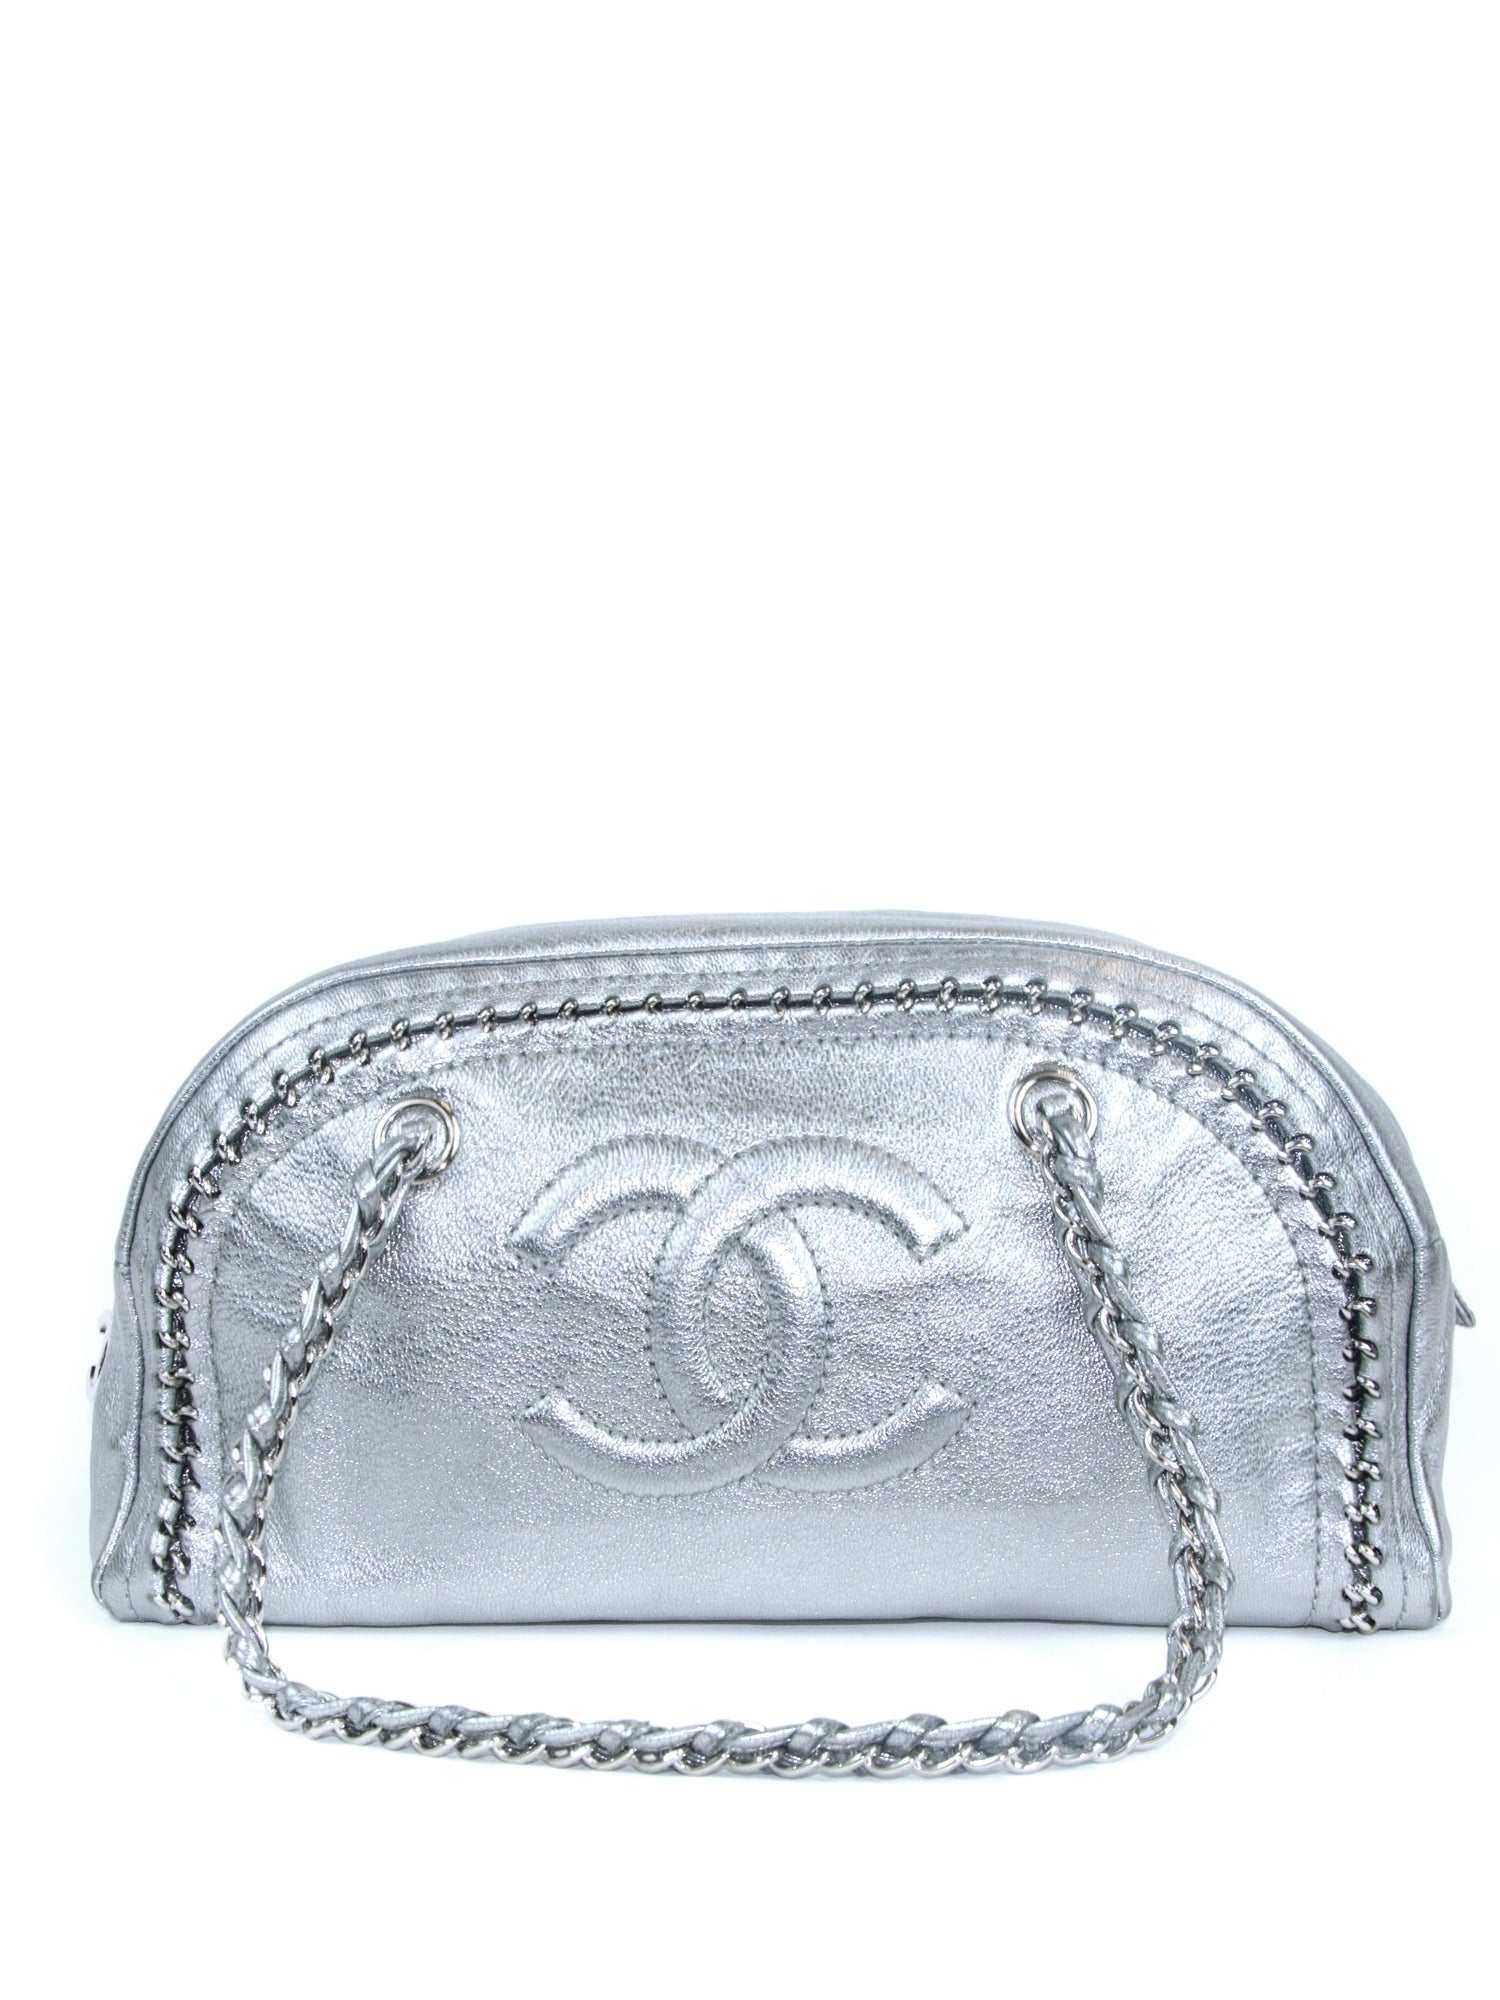 #69: My CHANEL Mademoiselle Bowling Bag 